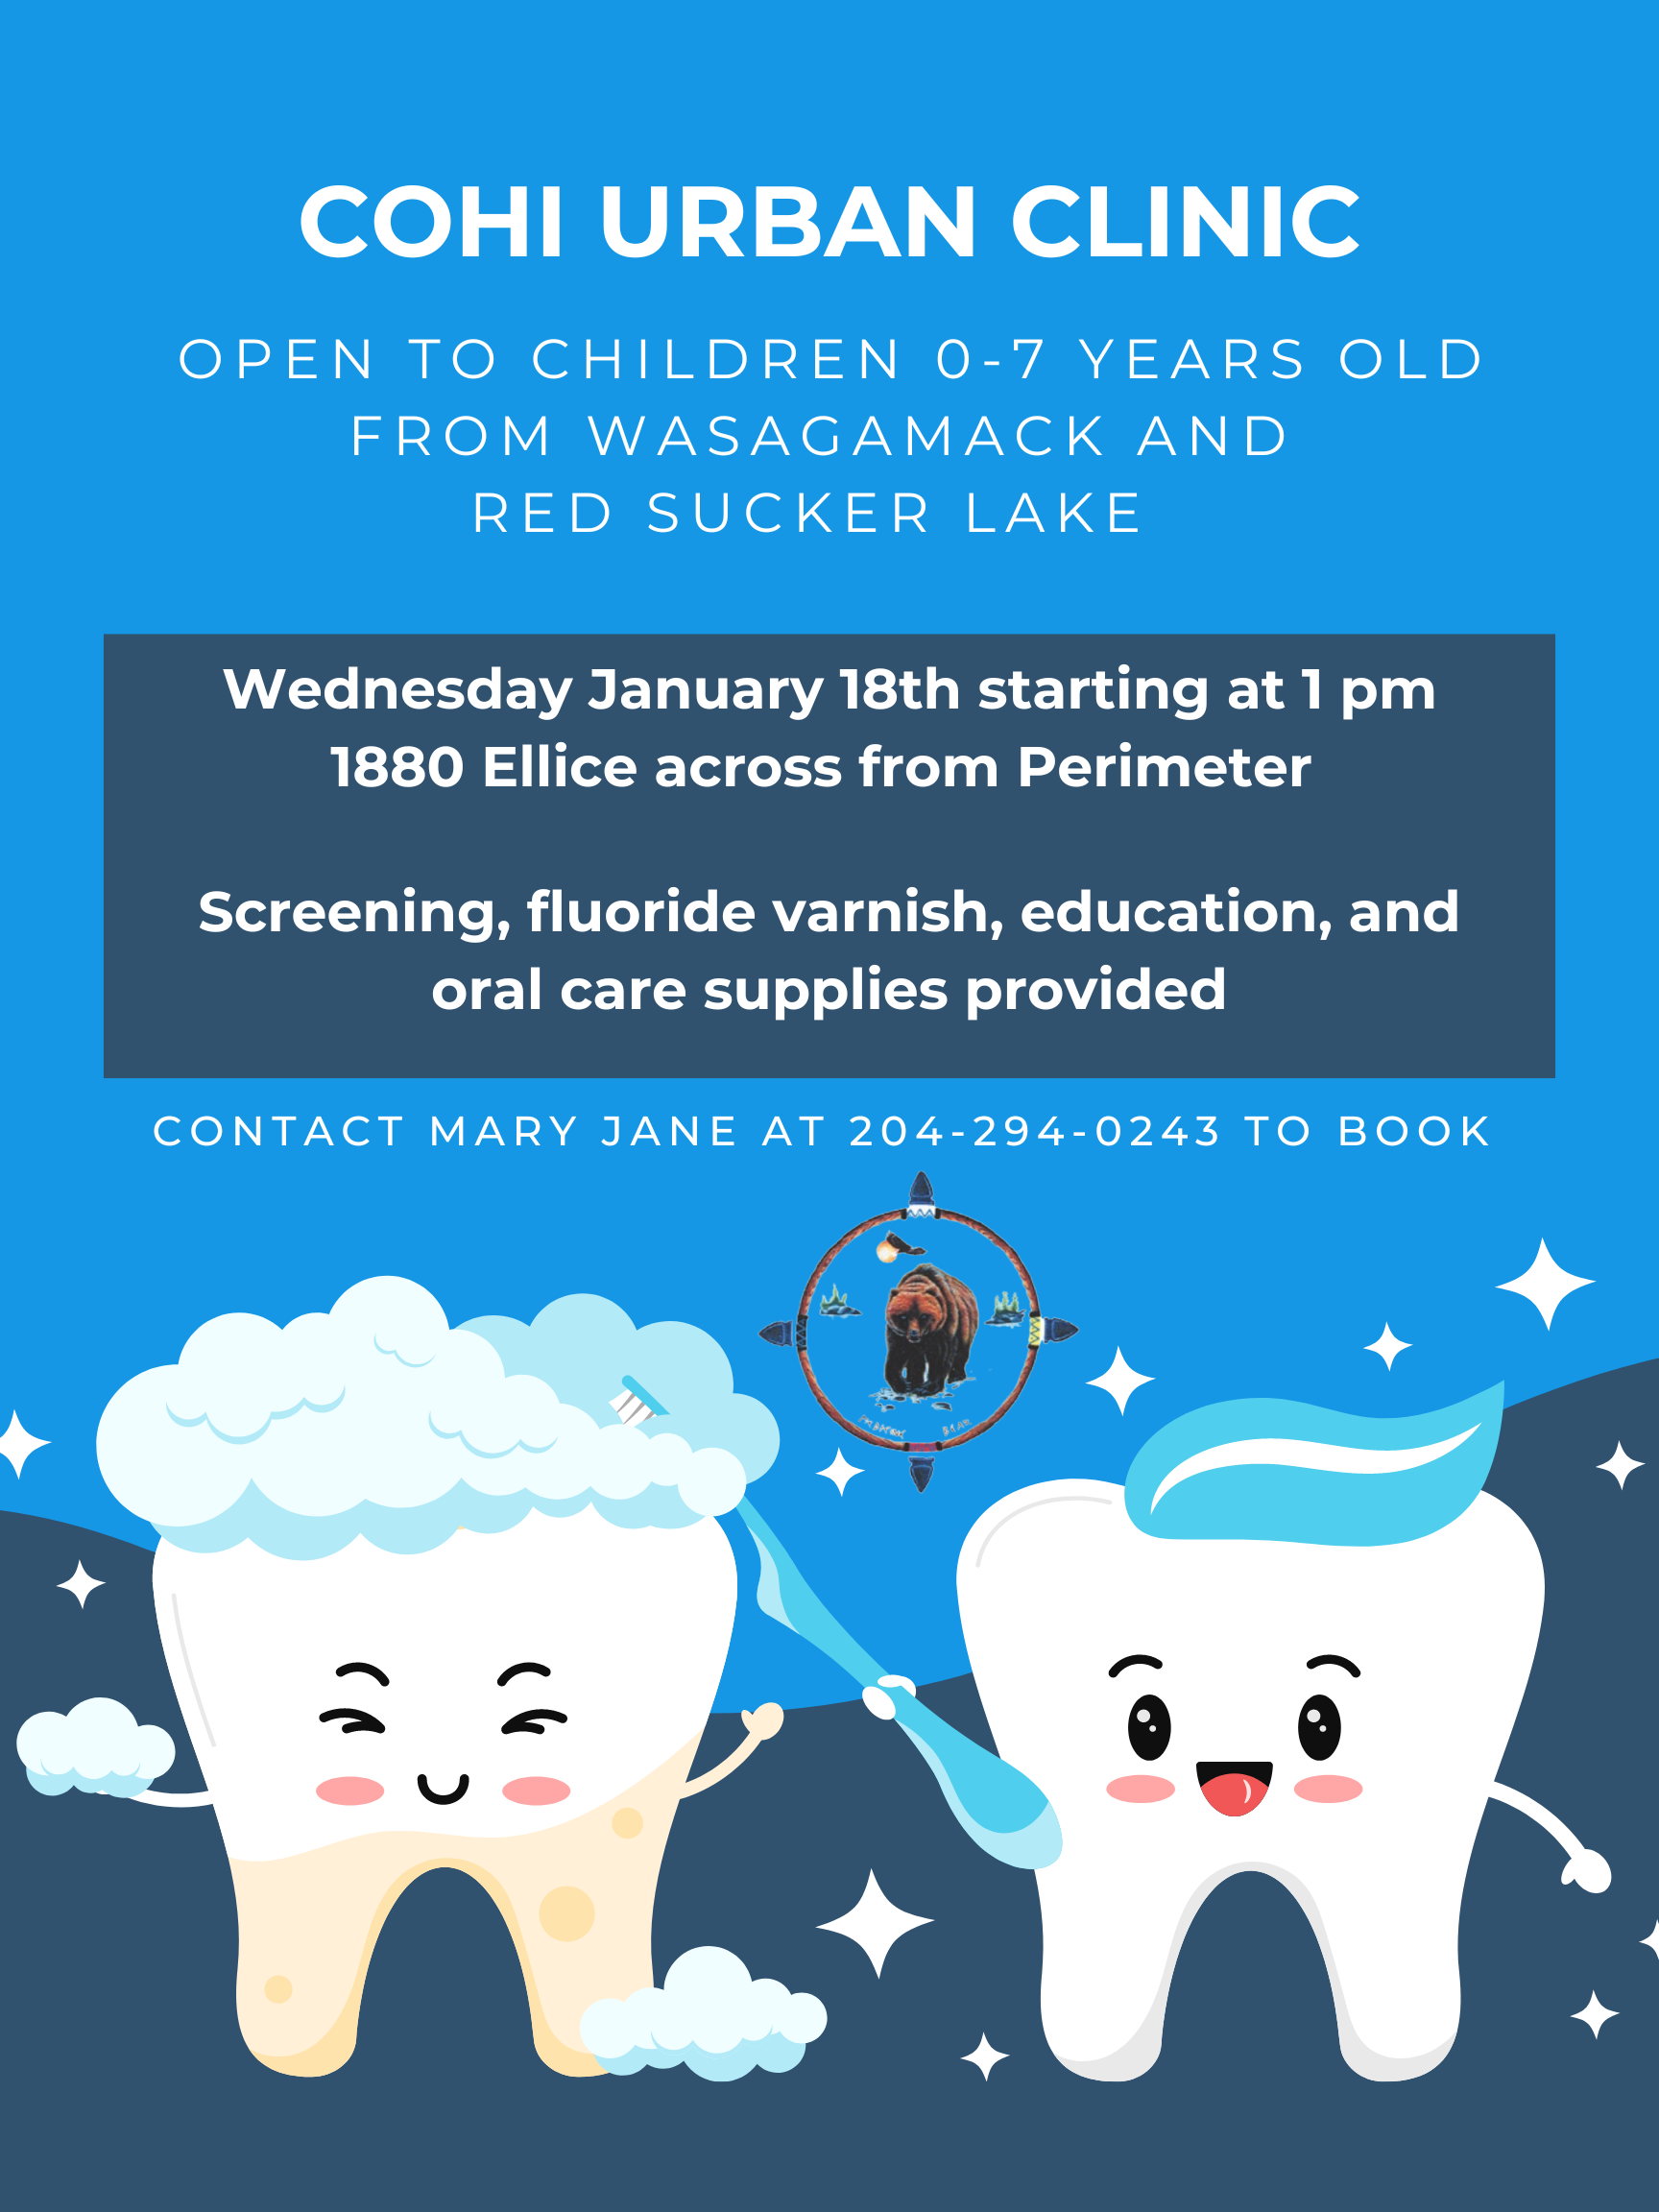 You are currently viewing Children’s Oral Health Initiative (COHI) Urban Clinic